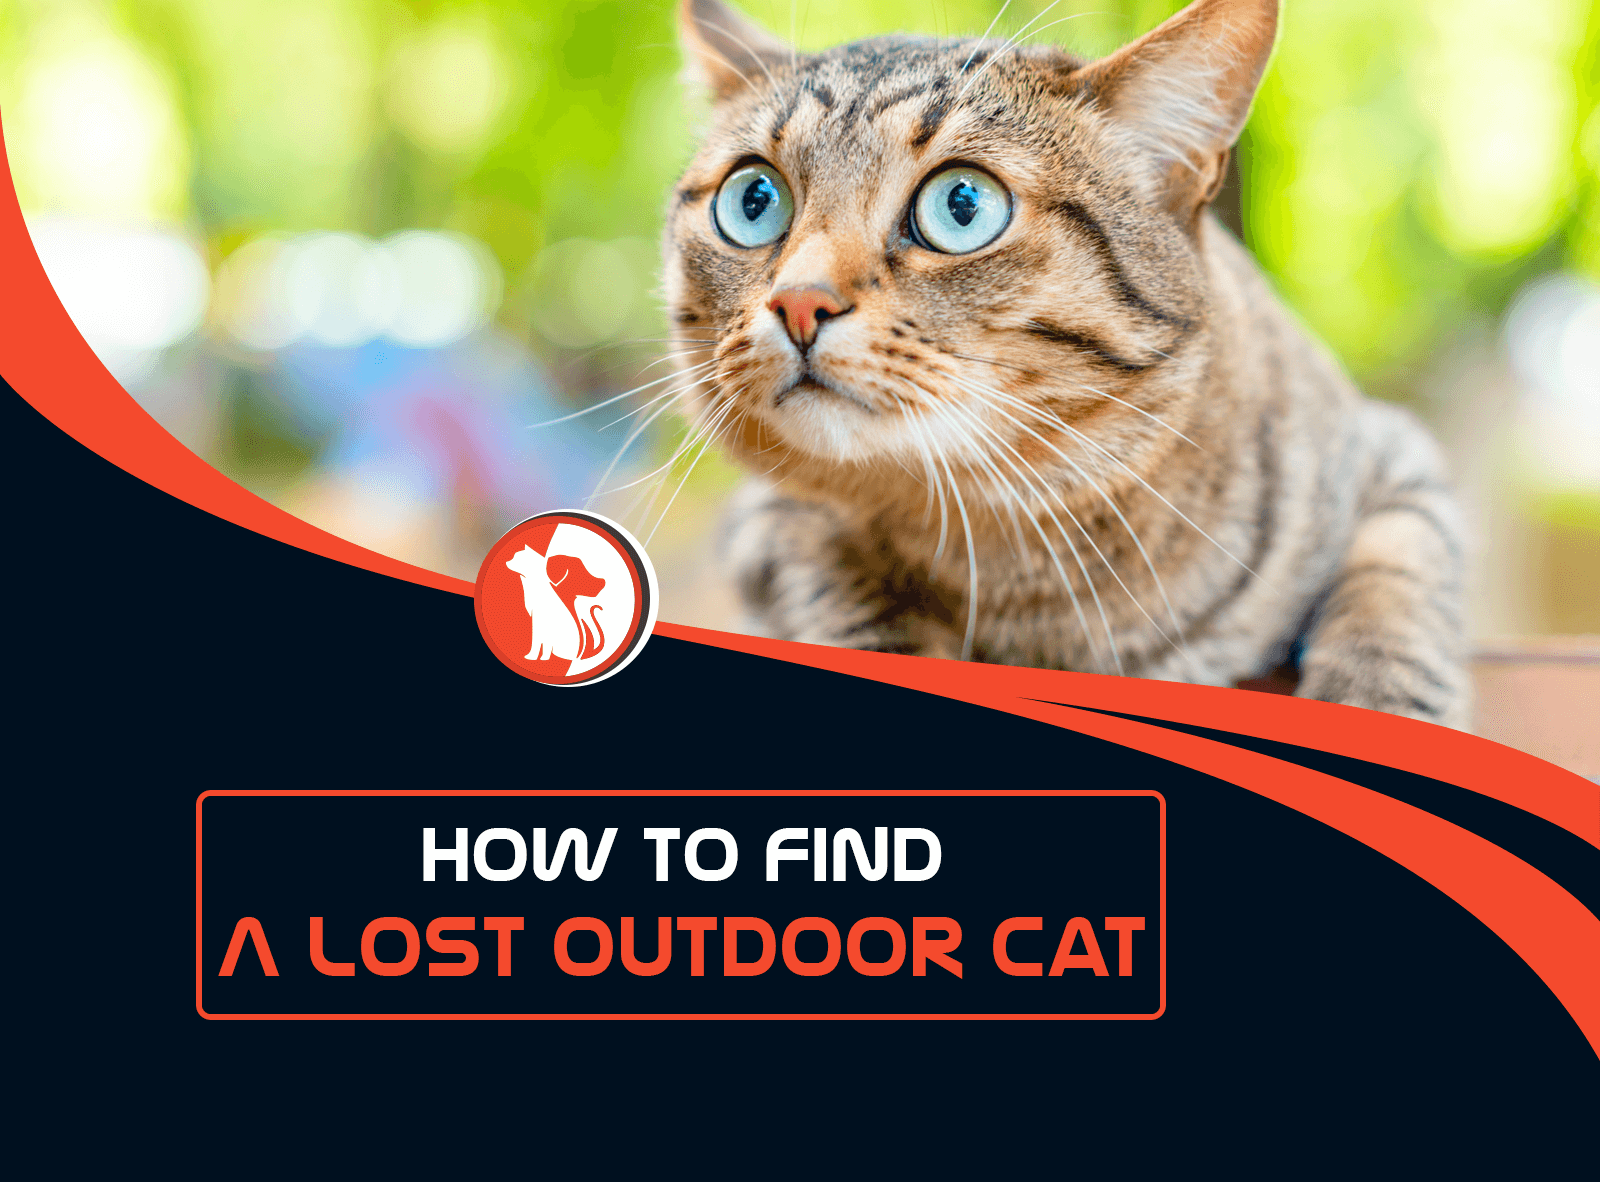 How to Find a Lost Outdoor Cat